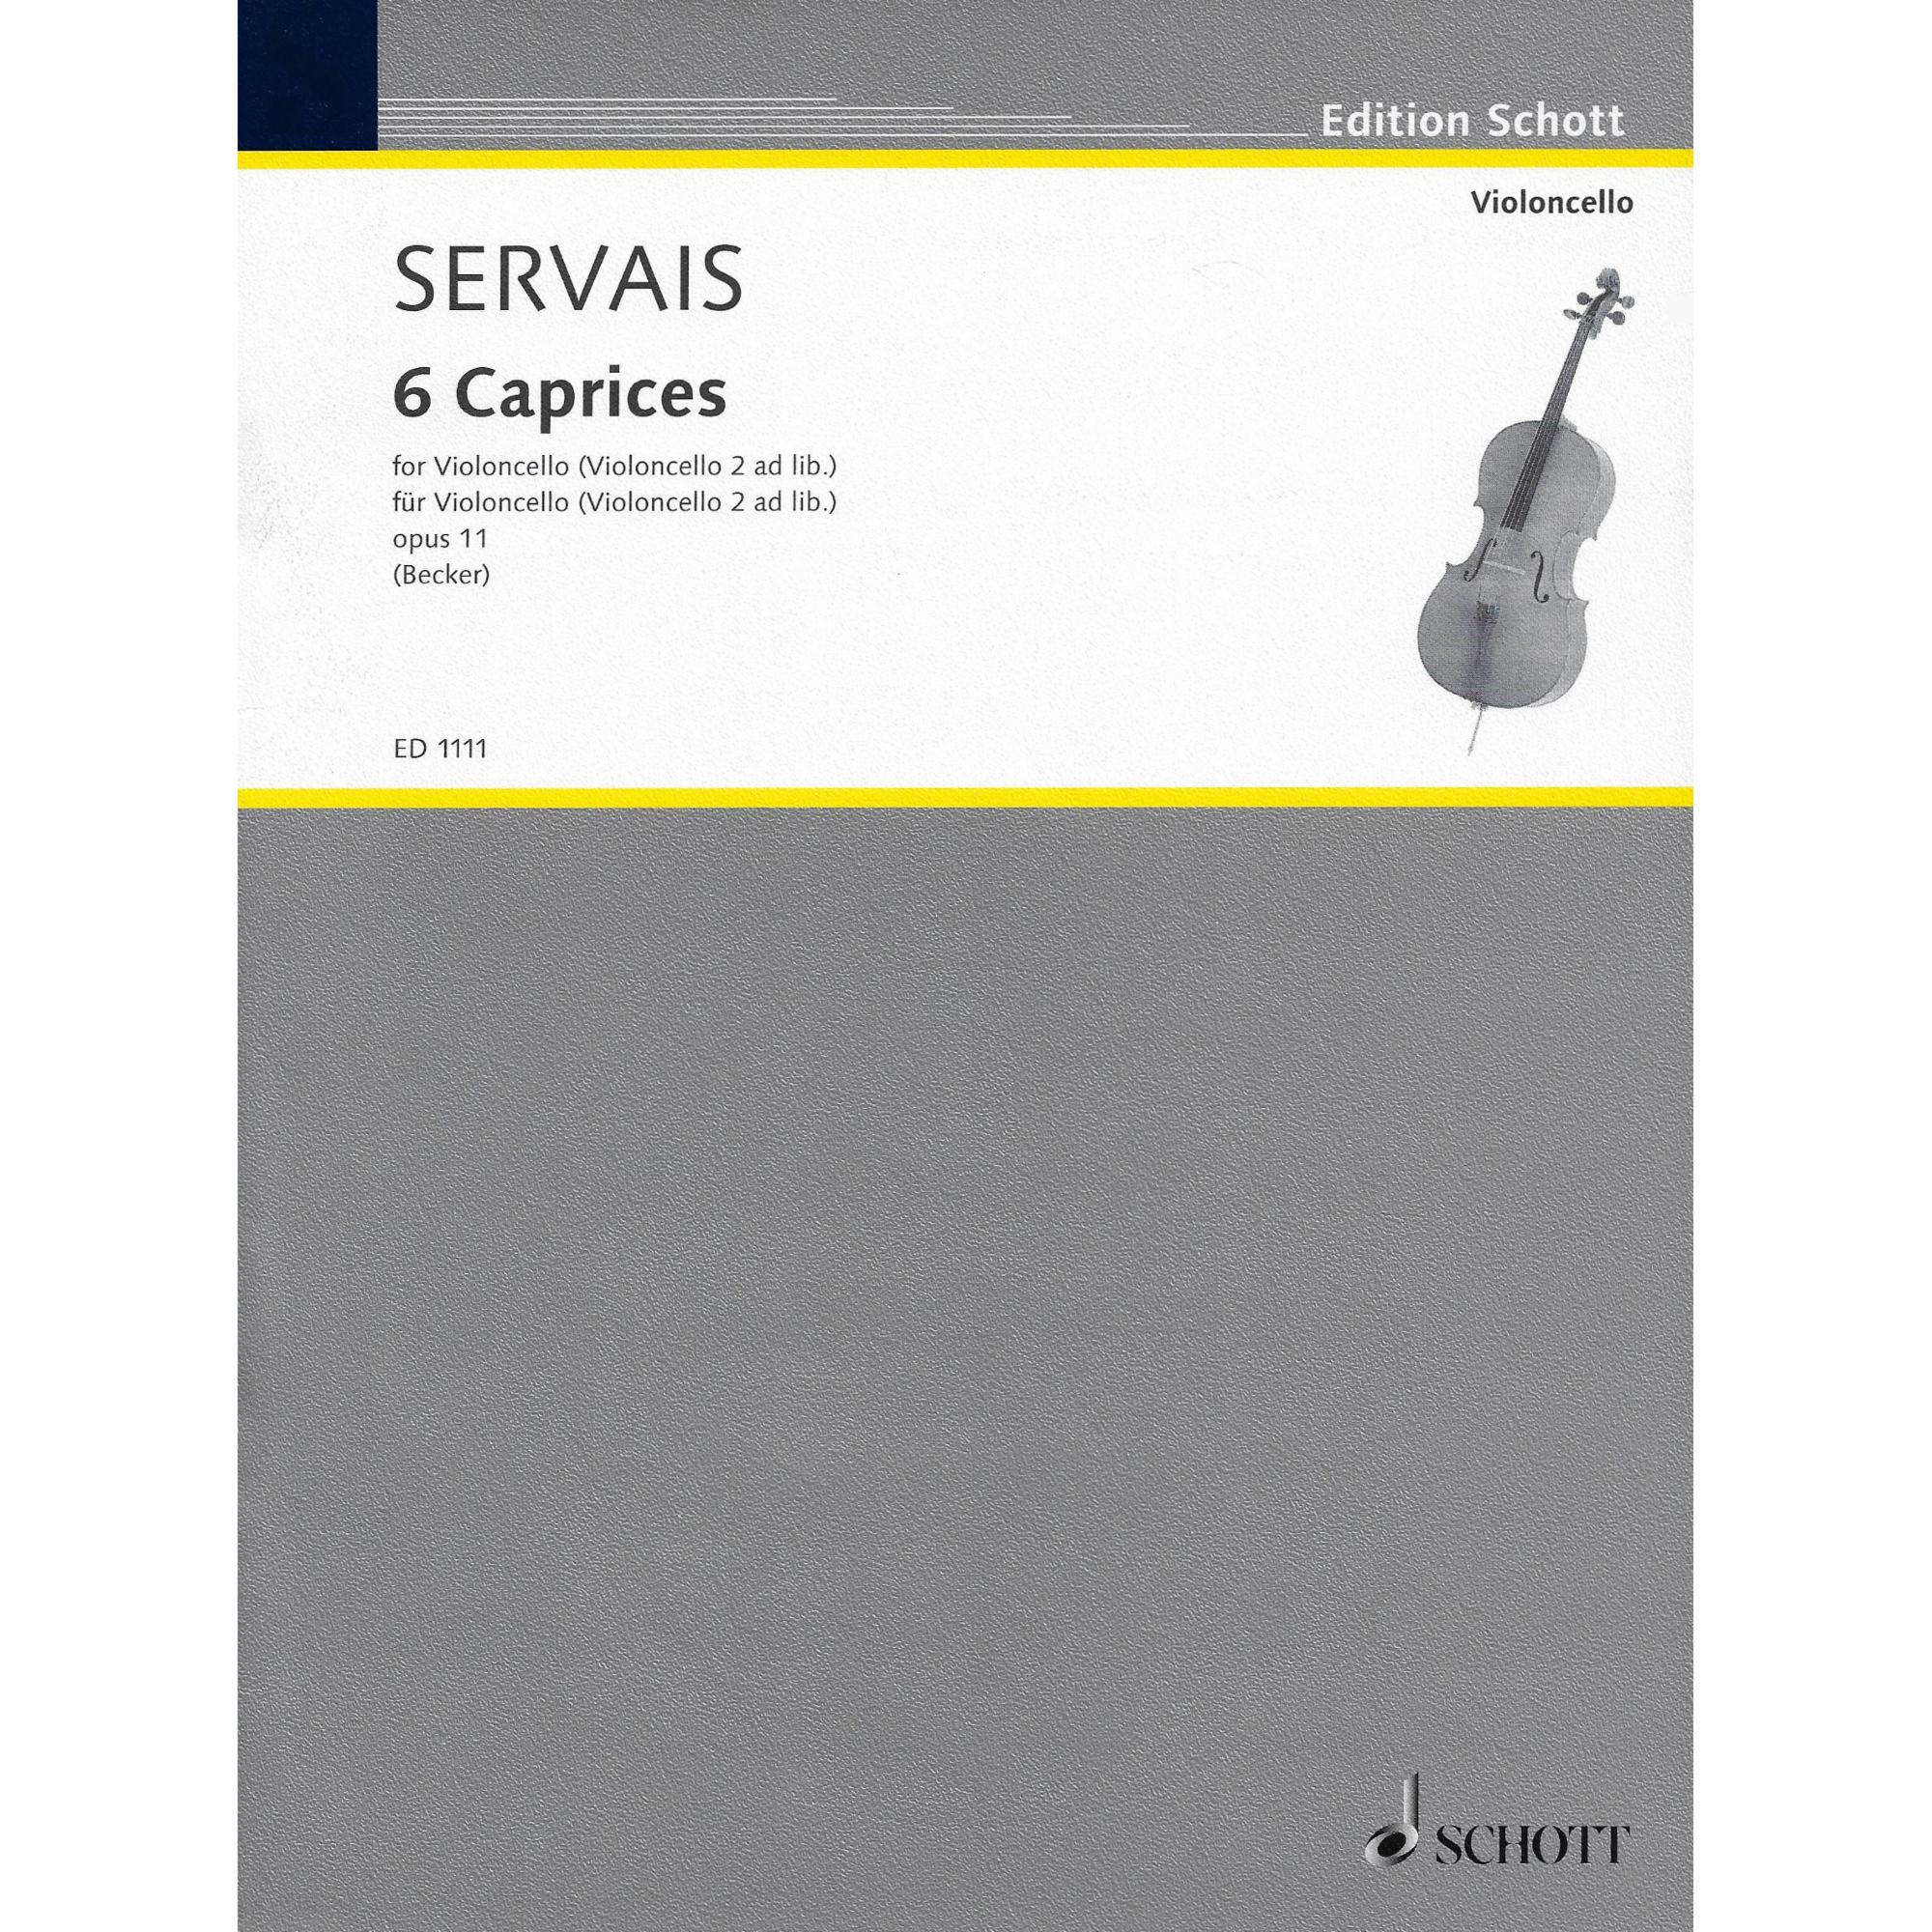 Servais -- Six Caprices, Op. 11 for Two Cellos